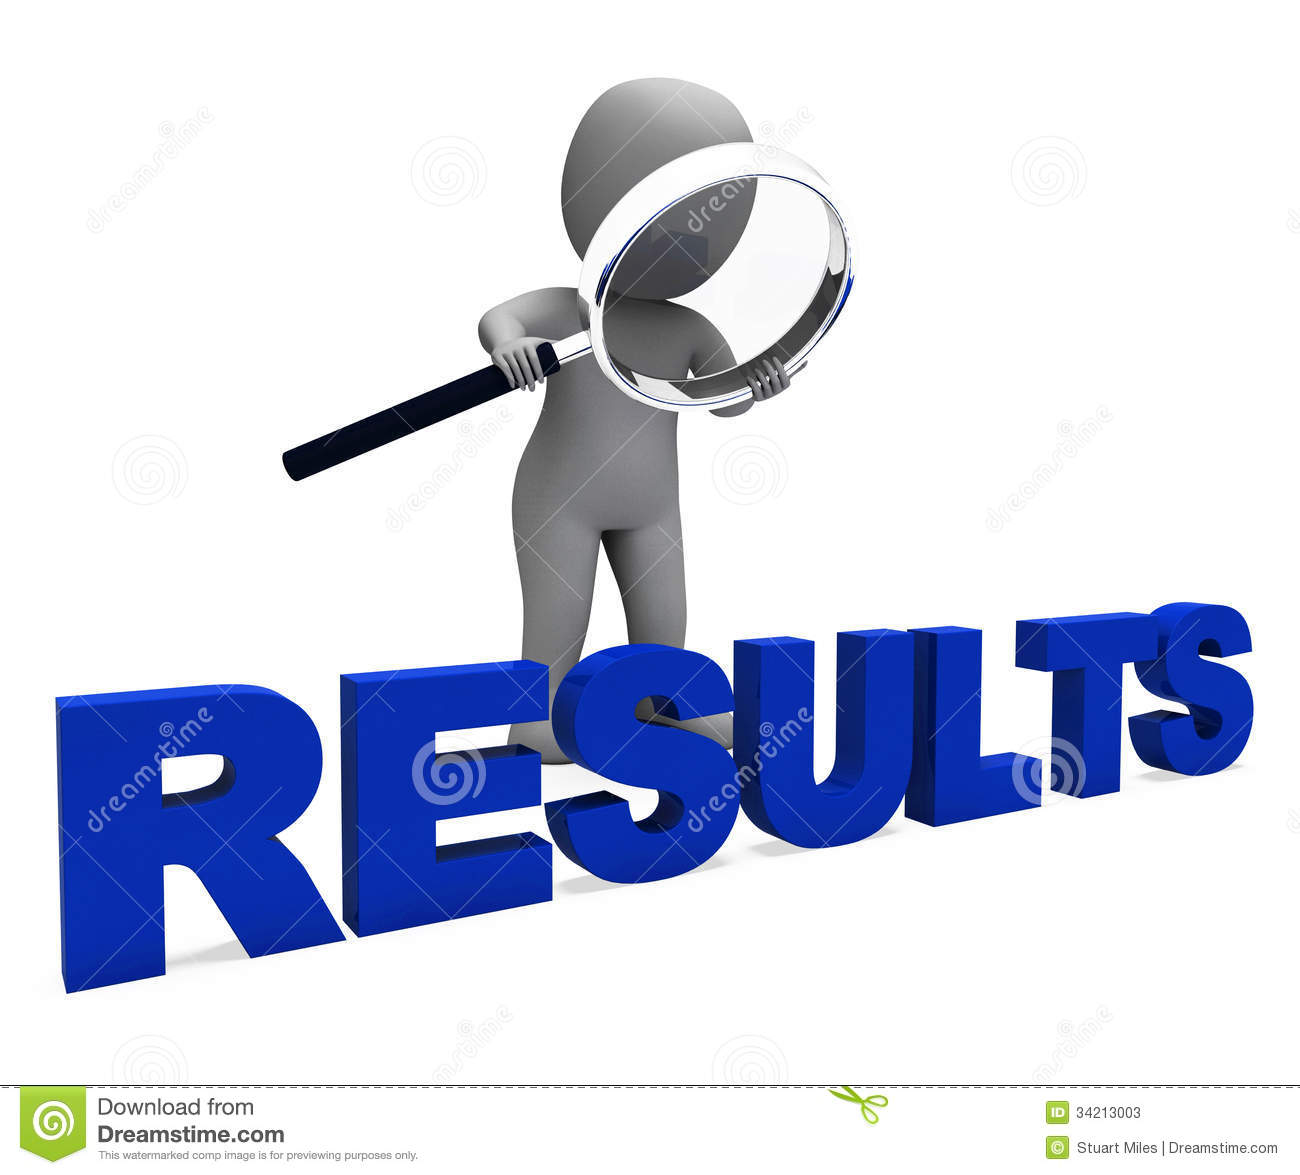 Shows Improvement Result Or Outcome Stock Photos   Image  34213003